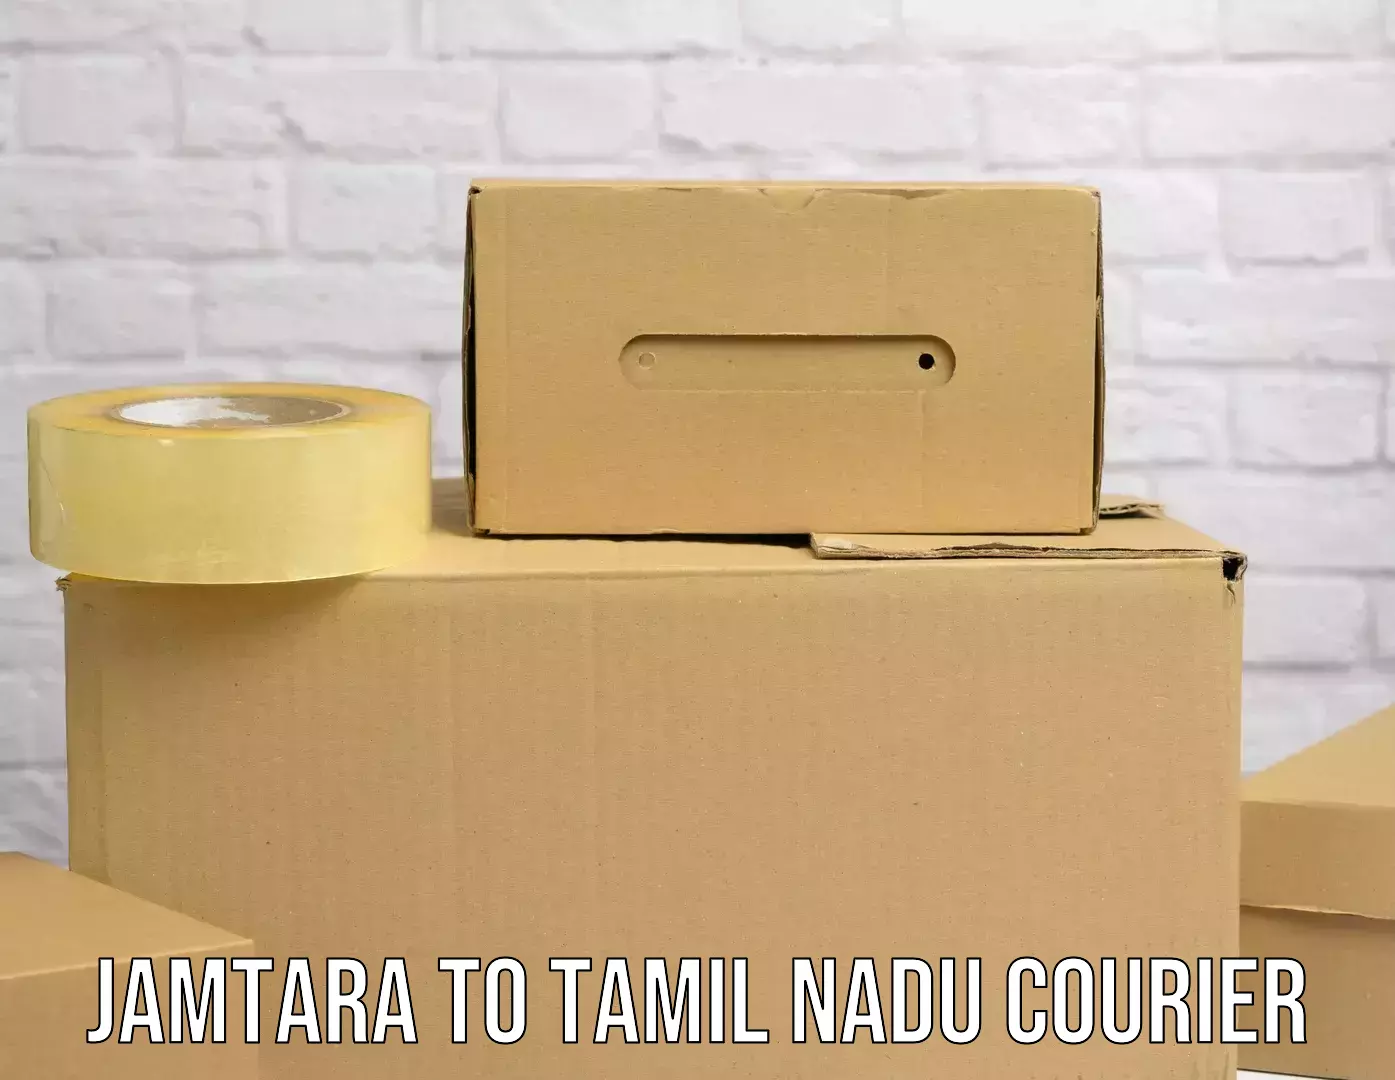 Same-day delivery options Jamtara to Gudalur